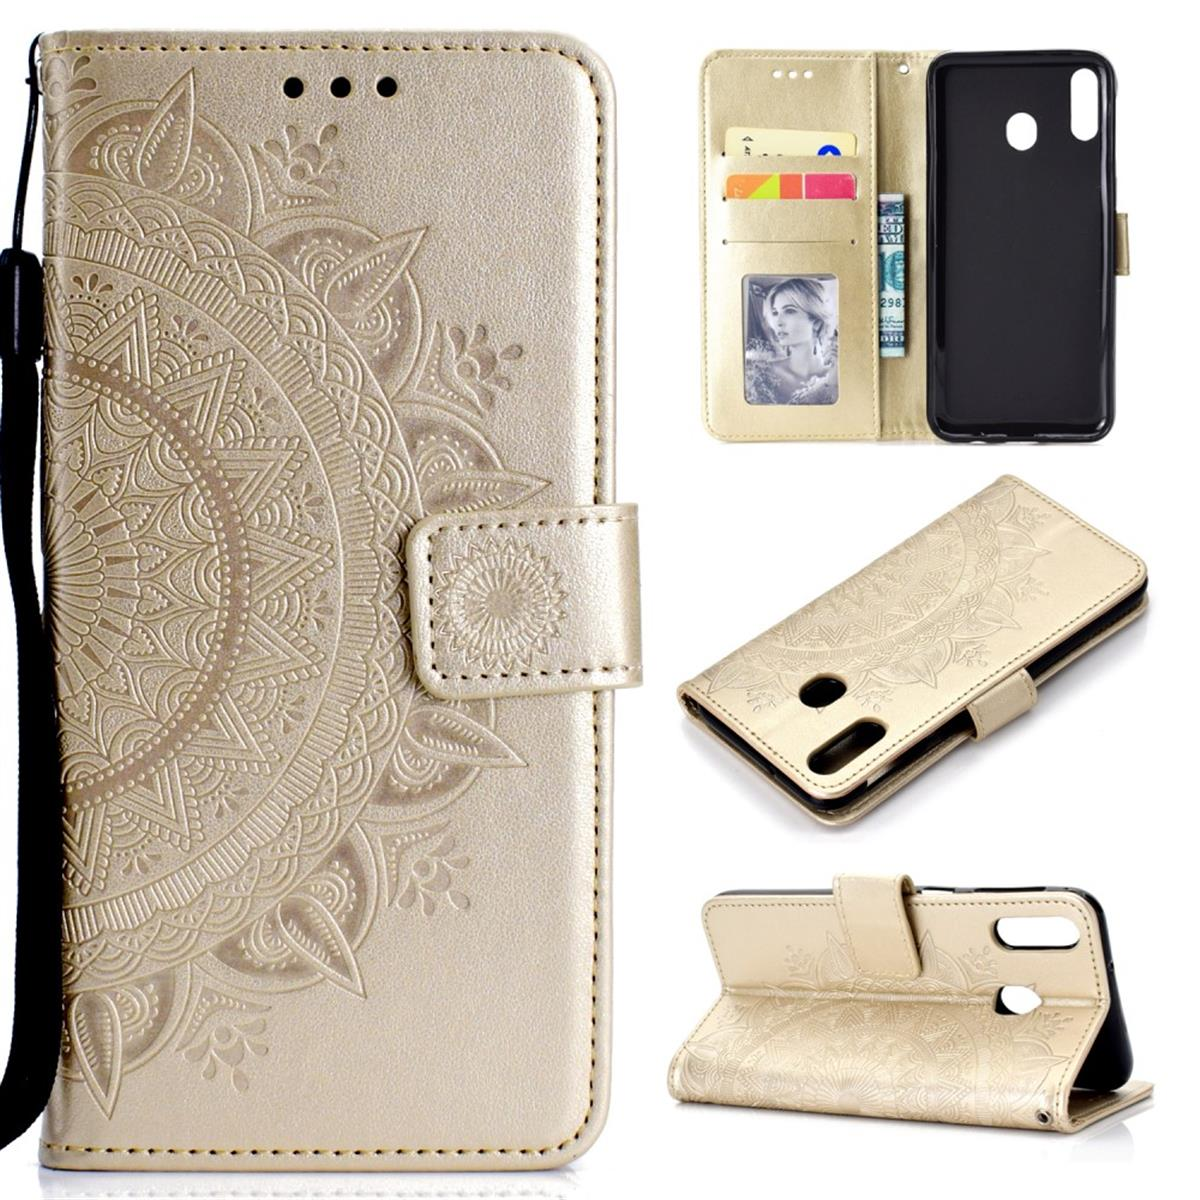 COVERKINGZ Klapphülle mit Mandala Huawei, Gold Y6p, Muster, Bookcover